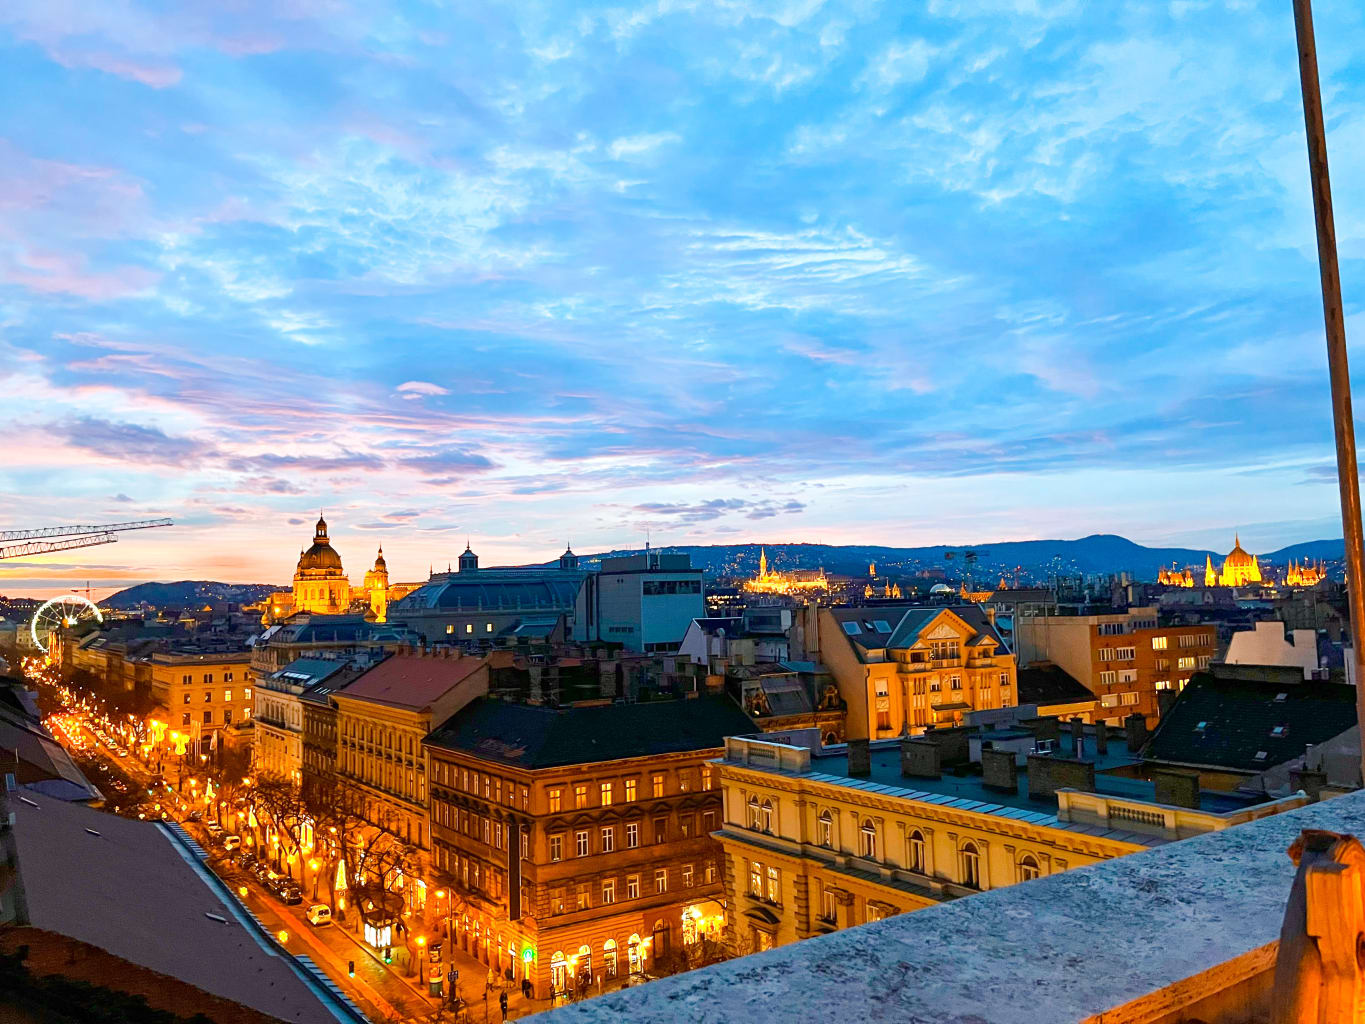 A view of the Budapest cityscape during the evening.